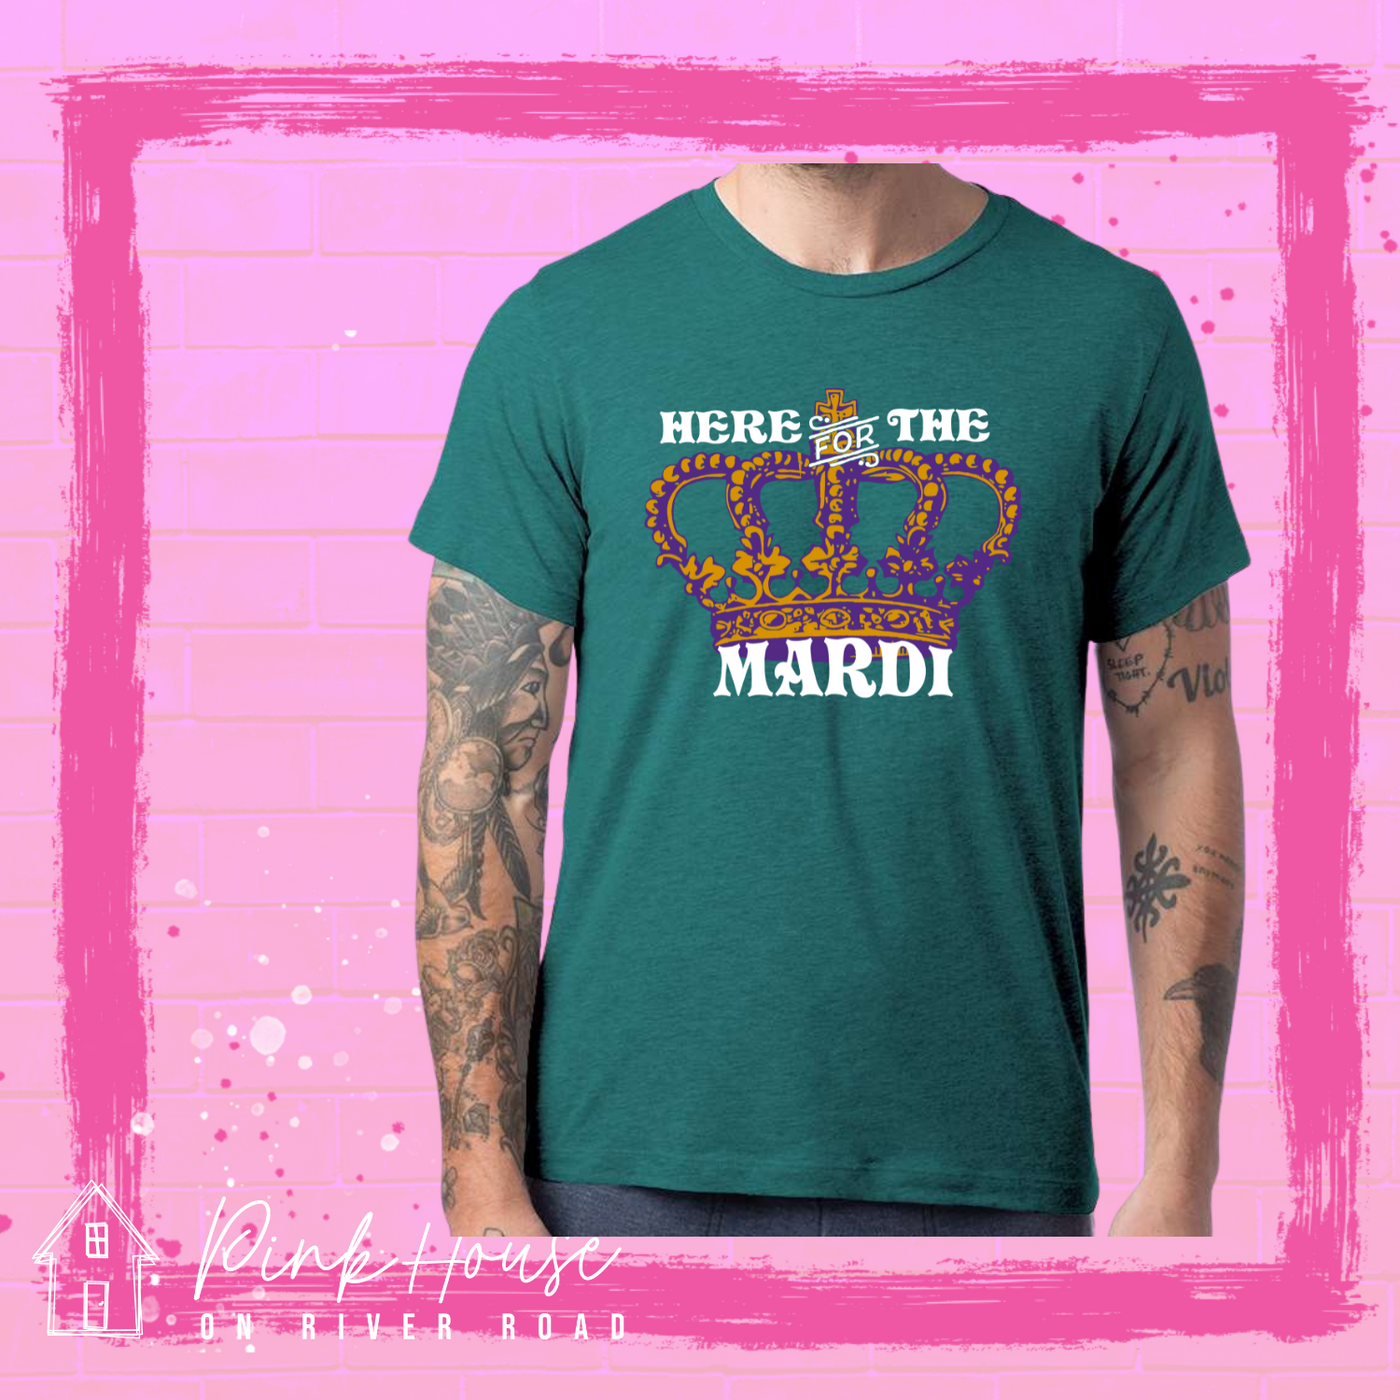 Dark Teal Graphic tee. Graphic is of an ornate Crown in purple and gold. Above the crown reads "Here for the" and under the crown reads "Mardi"